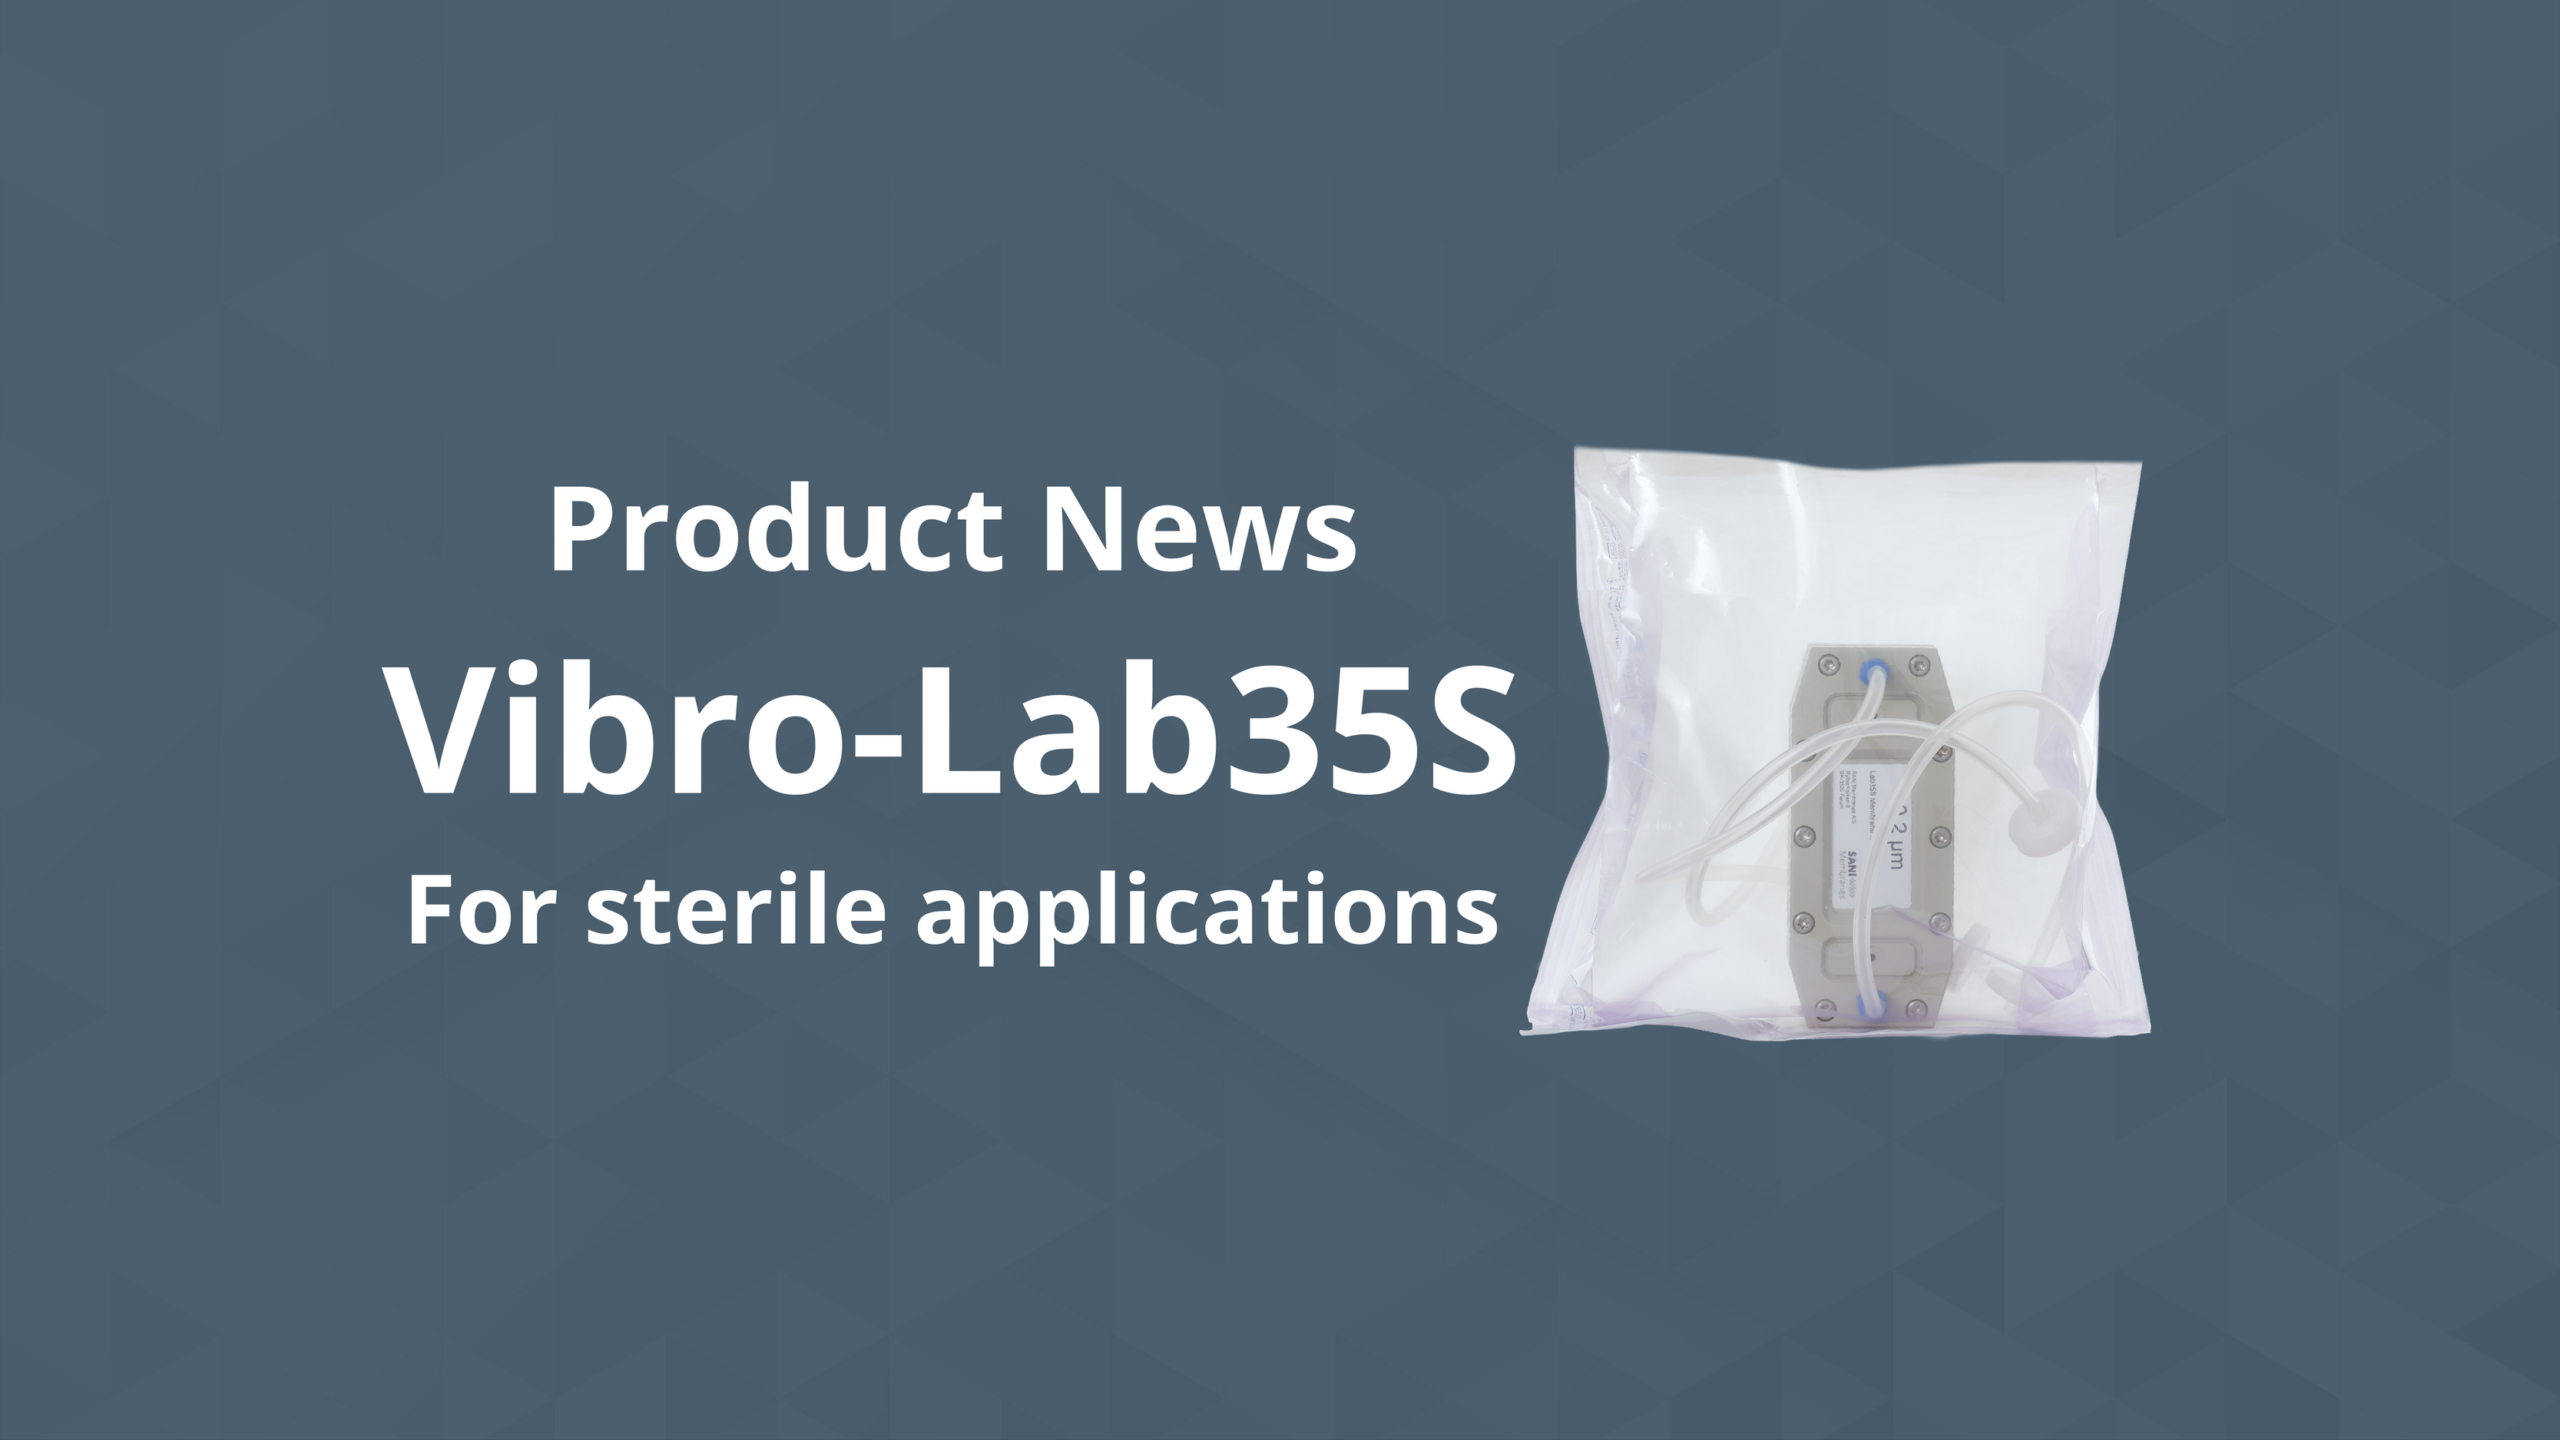 Product launch of Vibro-Lab35S